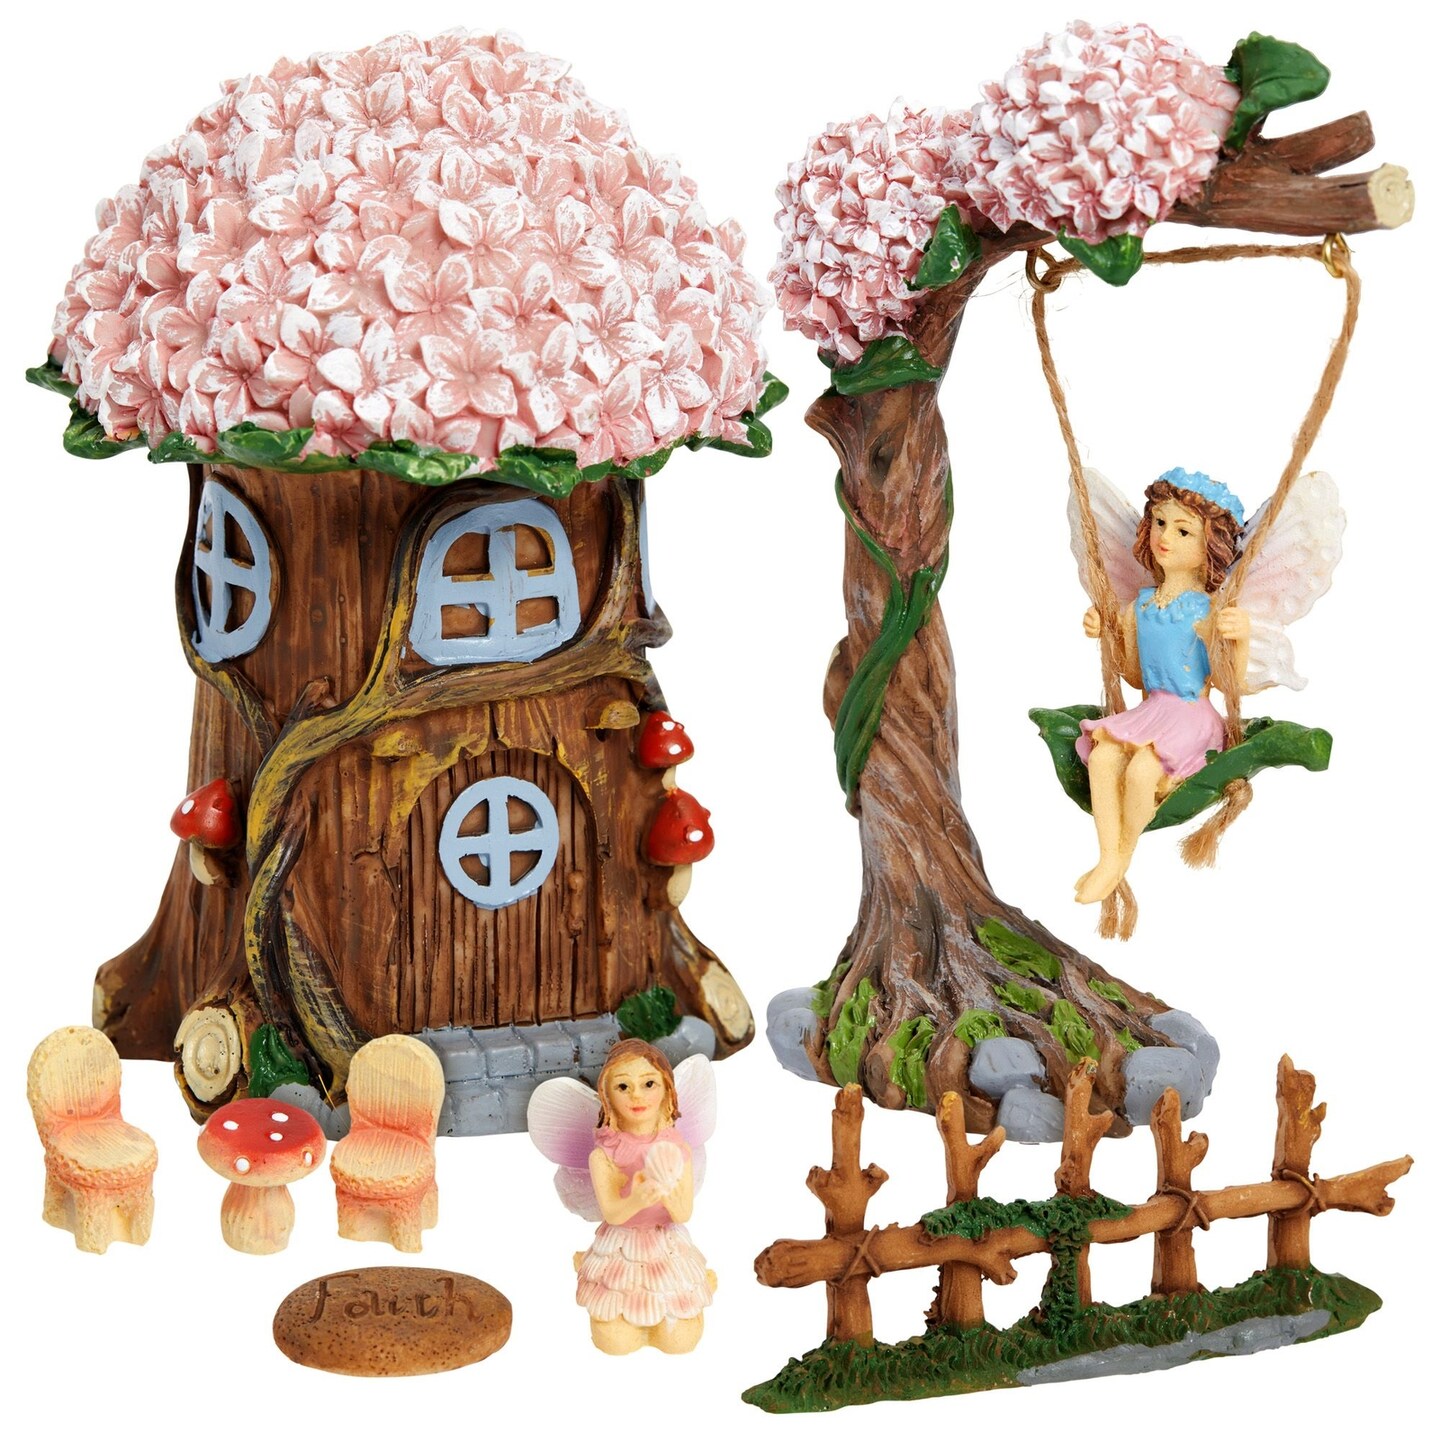 8 Piece Miniature Fairy Garden Accessories Outdoor Decor Figurines Kit for Kids, Mini Whimsical Ornaments and Decorations for Patio, House, Garden, Desk, Yard Supplies